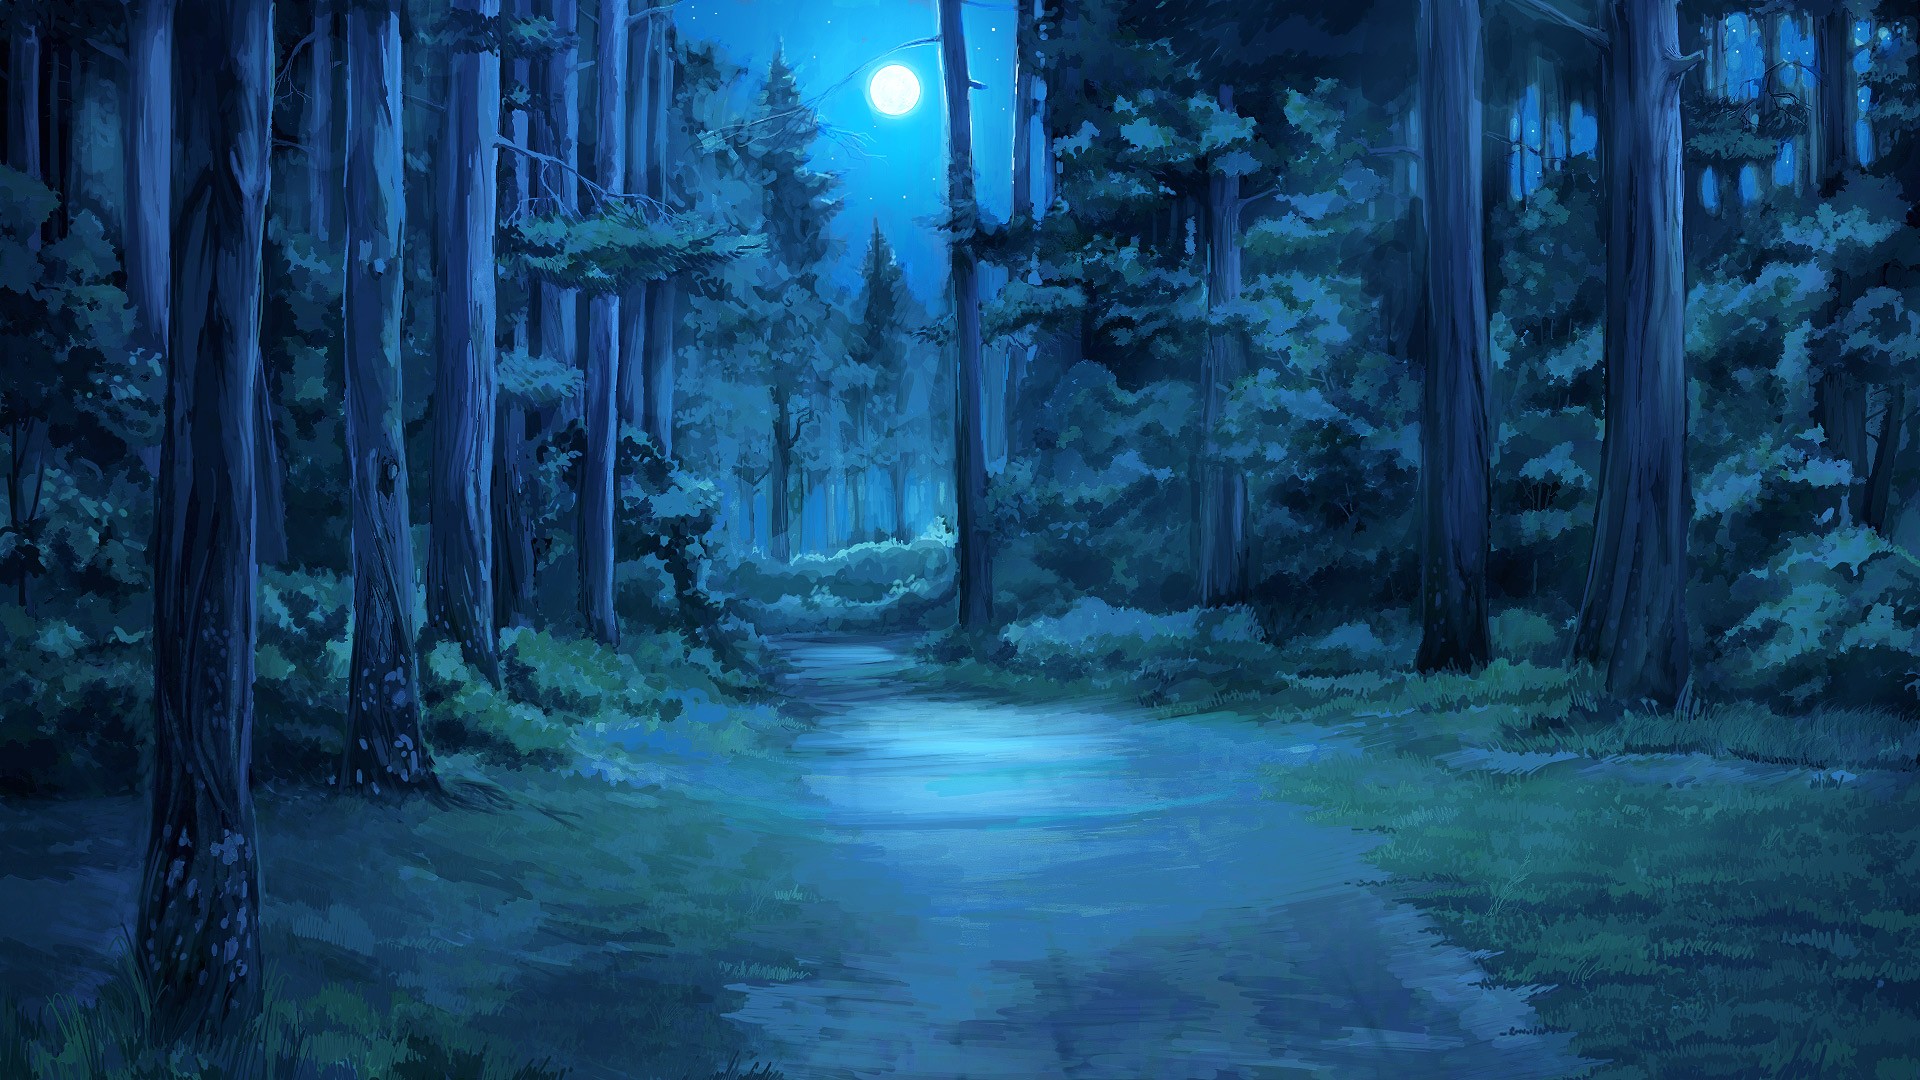 Everlasting Summer Moon Moonlight Forest Clearing Blue Night Path Wallpaper:1920x1080